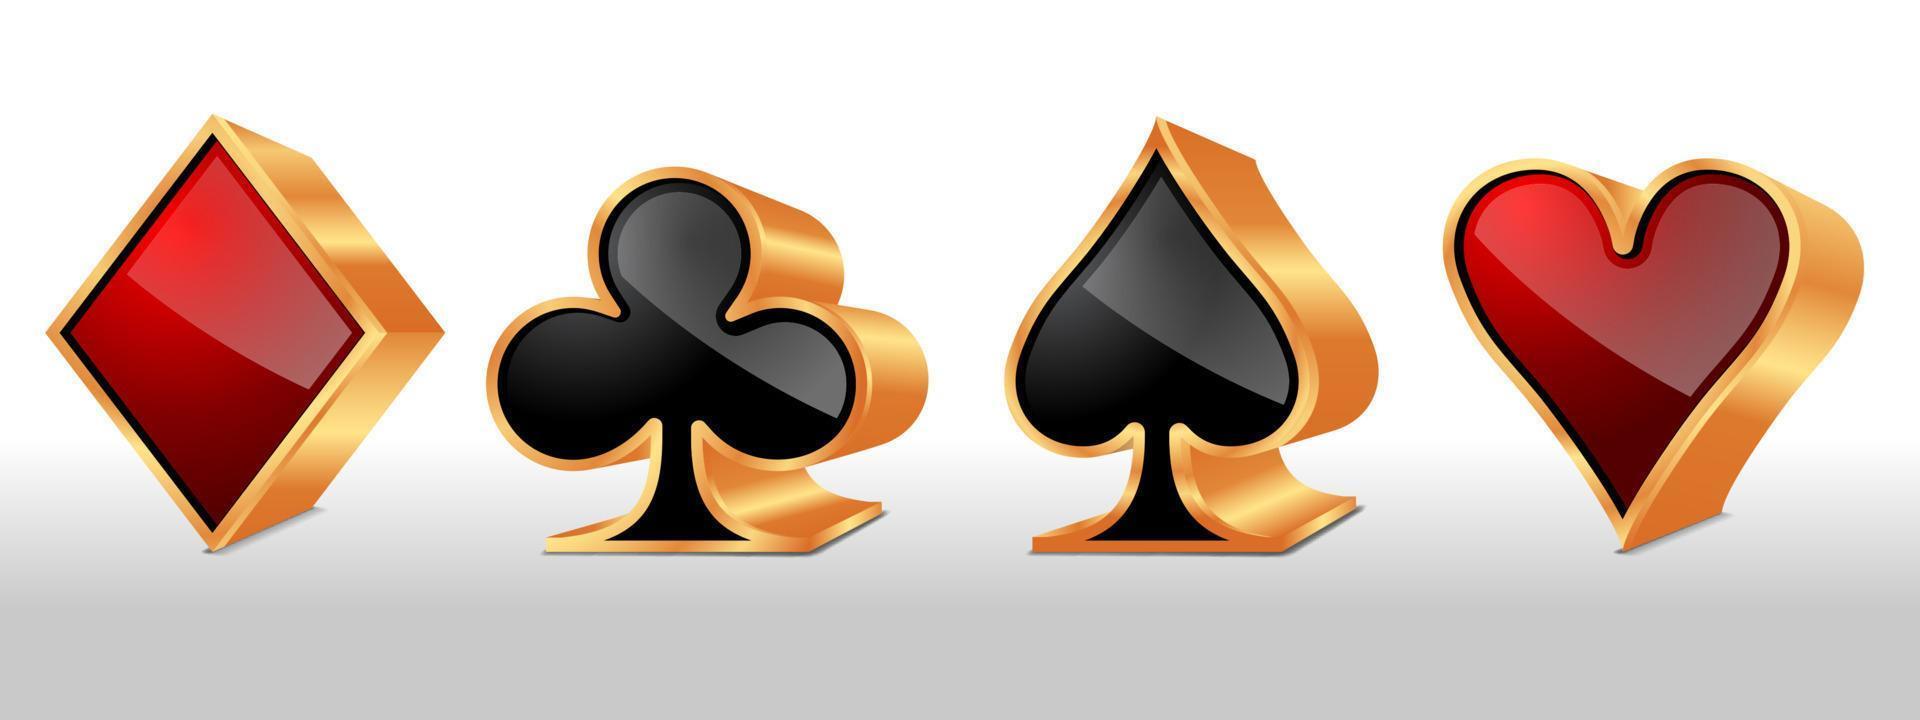 Poker card suits. Set of four aces playing cards suits. Vector illustration.